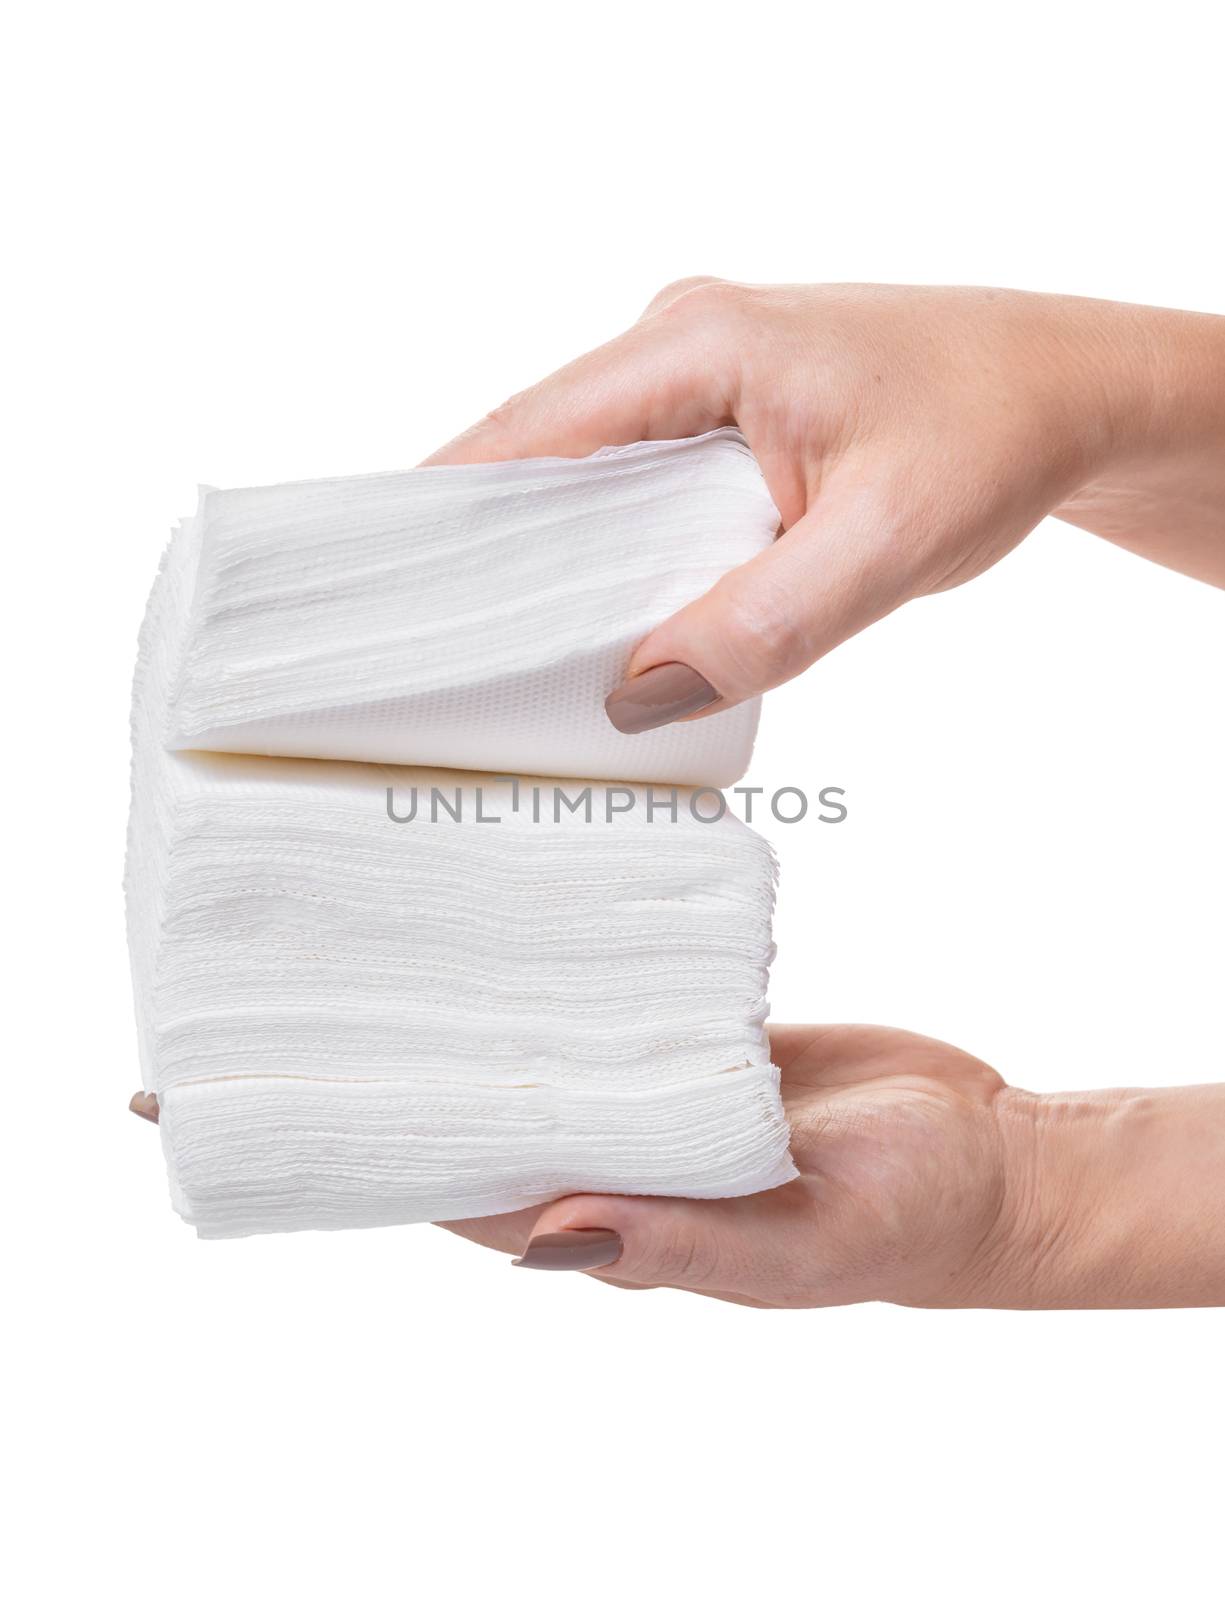 pack of napkins in hands on white background isolated